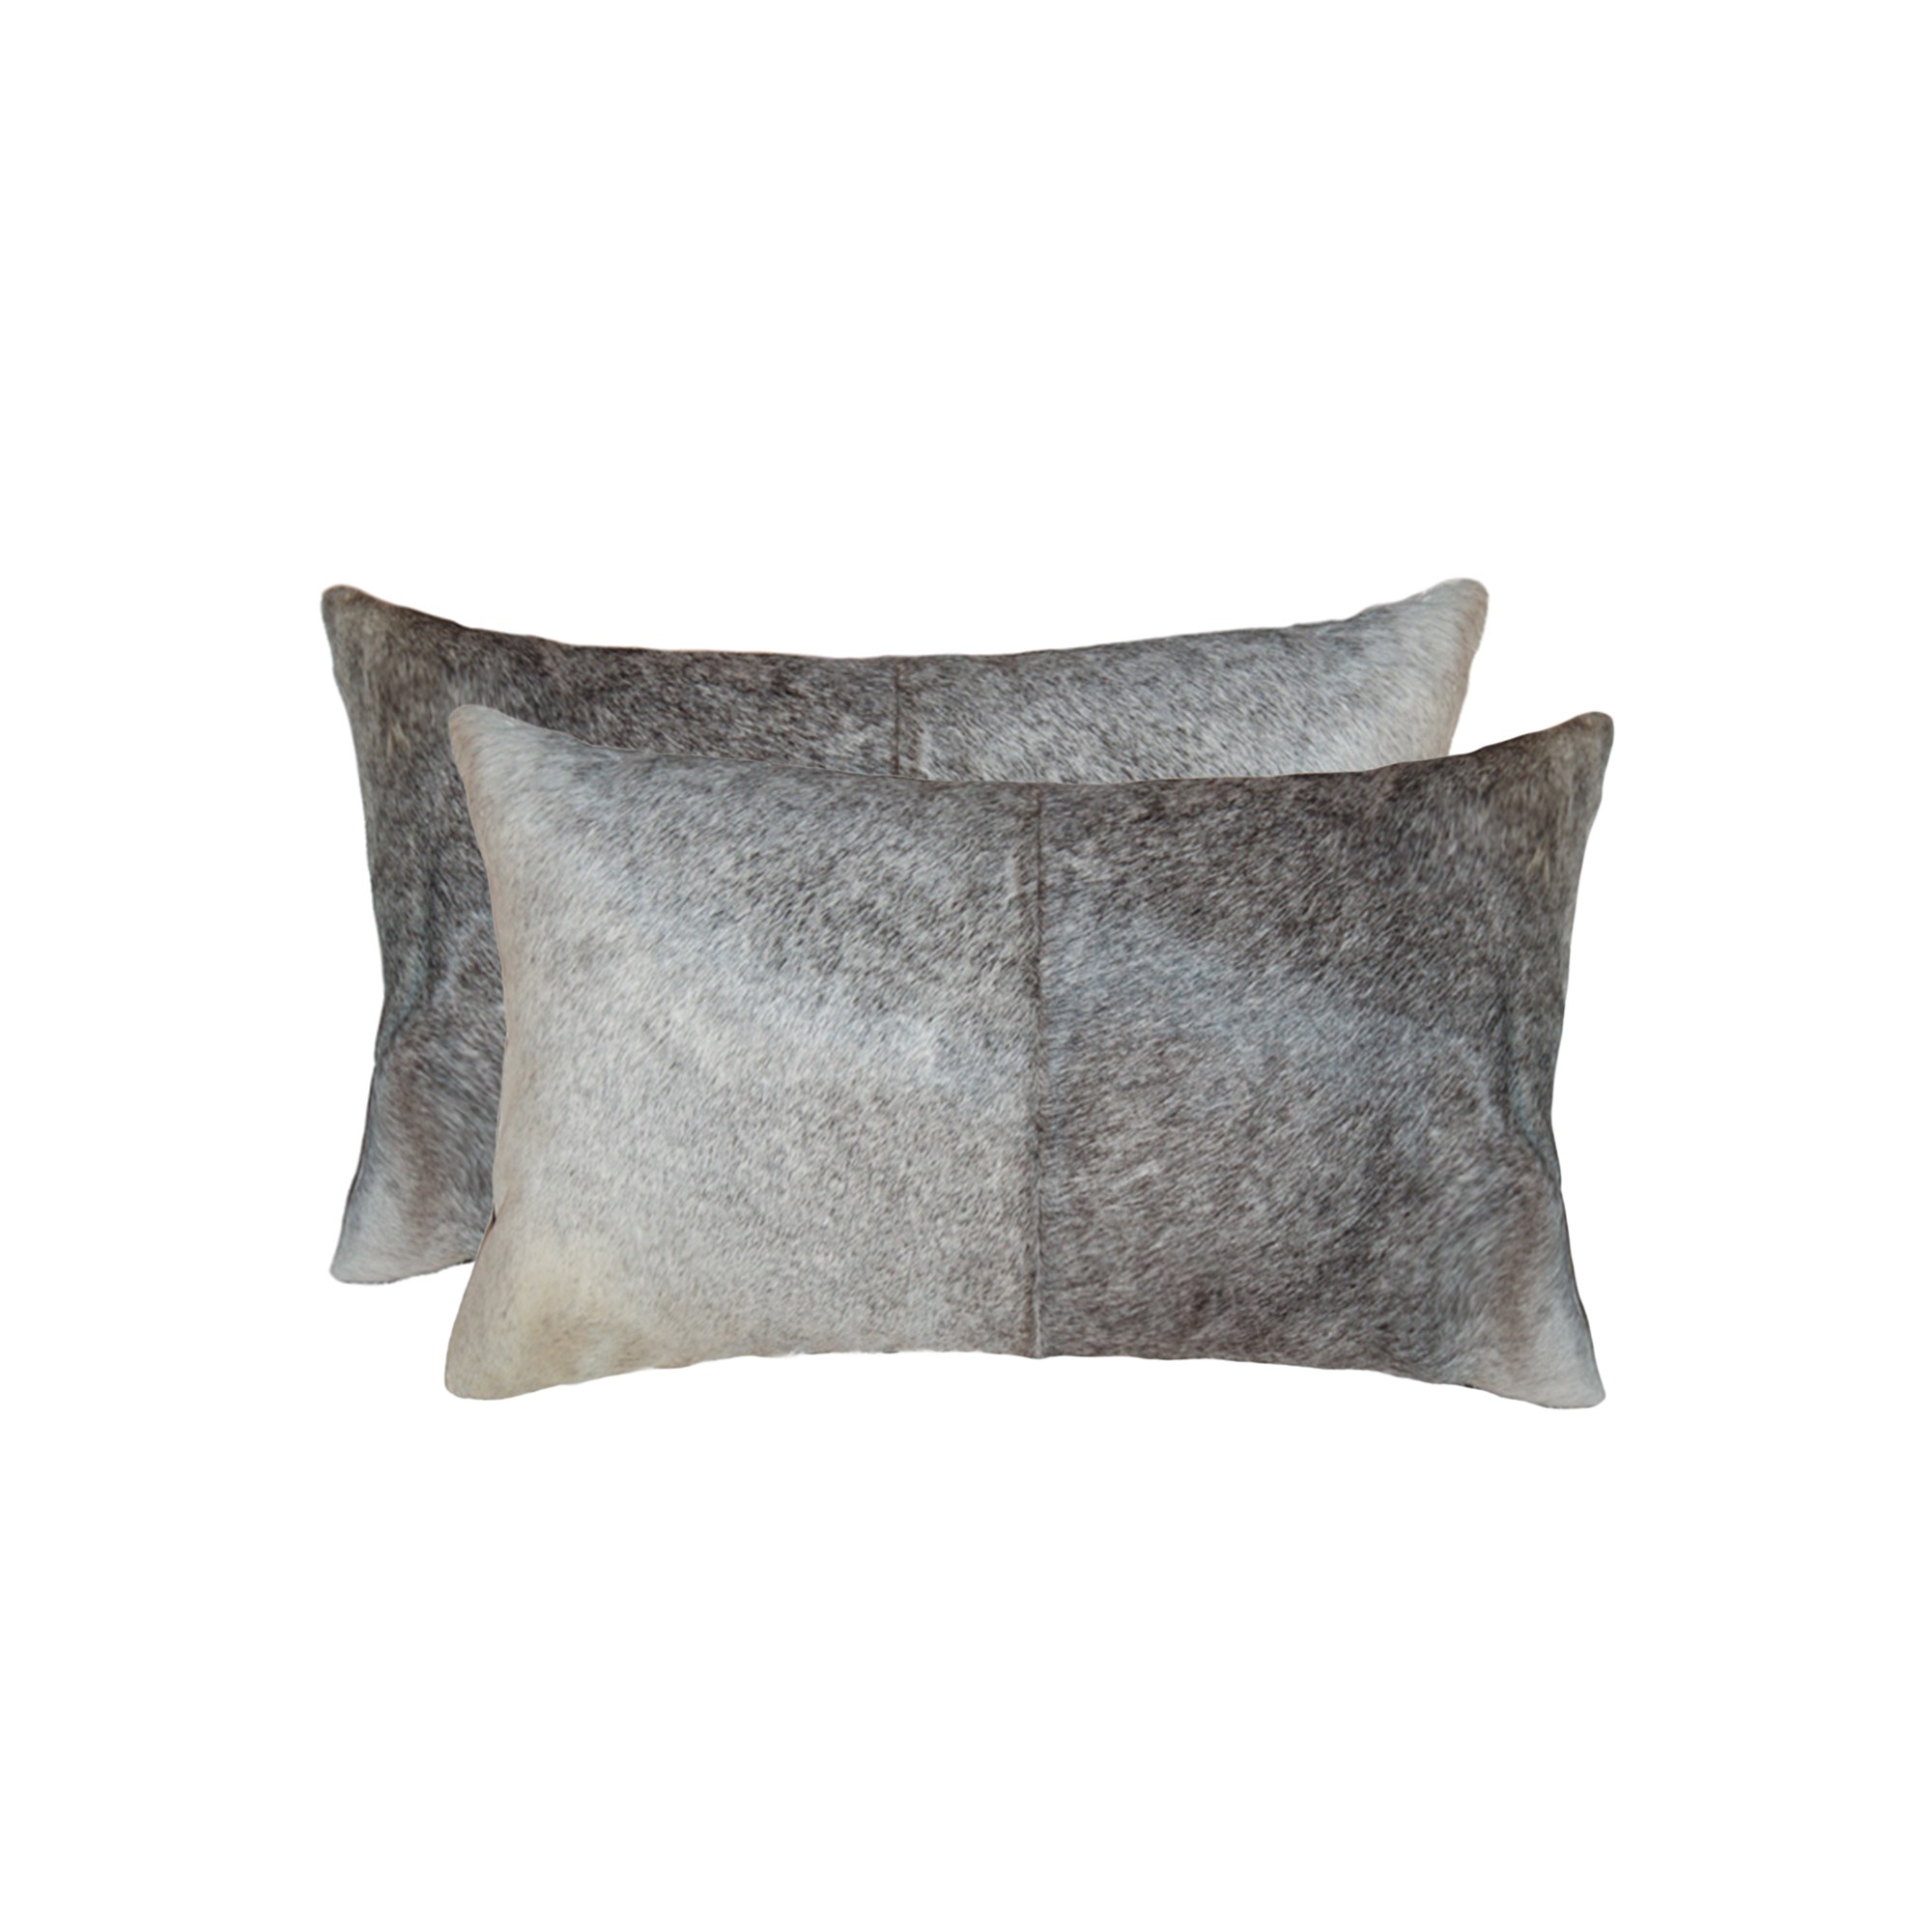 12" x 20" x 5" Salt And Pepper, Gray And White, Cowhide - Pillow 2-Pack